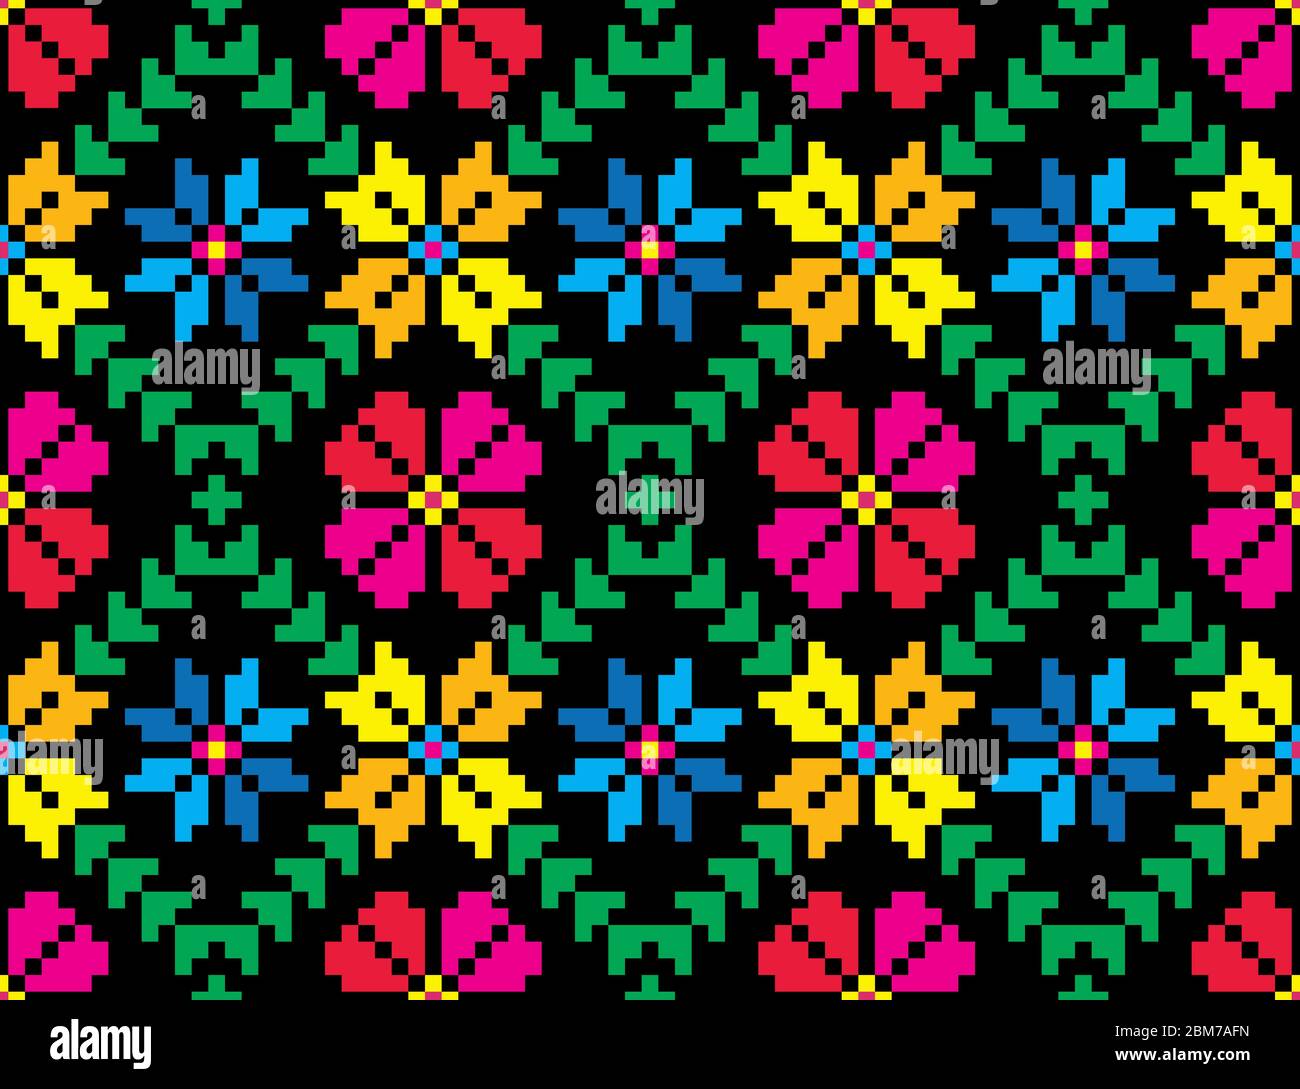 Transylvanian Folk Art seamless repeat pattern design with floral elements on black background. Eastern European traditional embroidery pattern Stock Vector